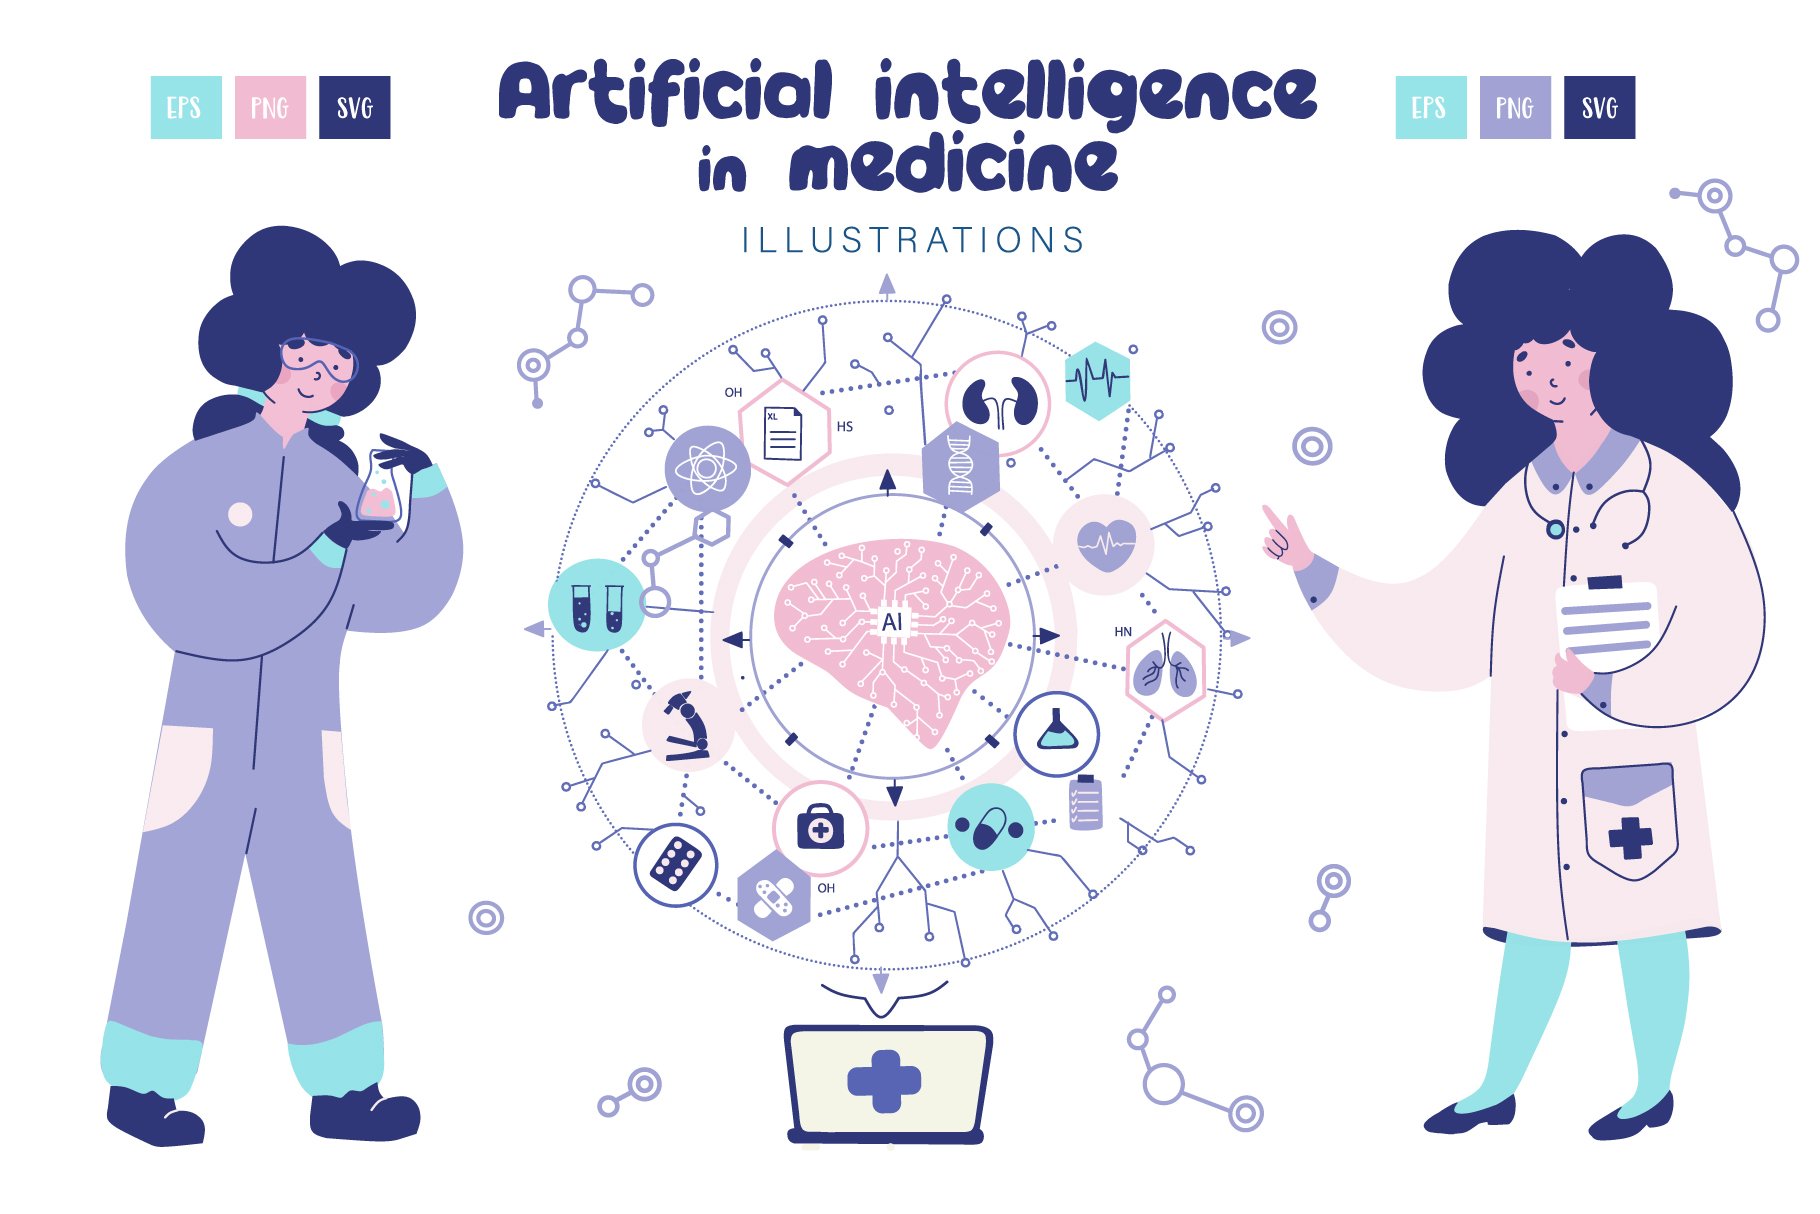 artificial intelligence in medicine cover image.